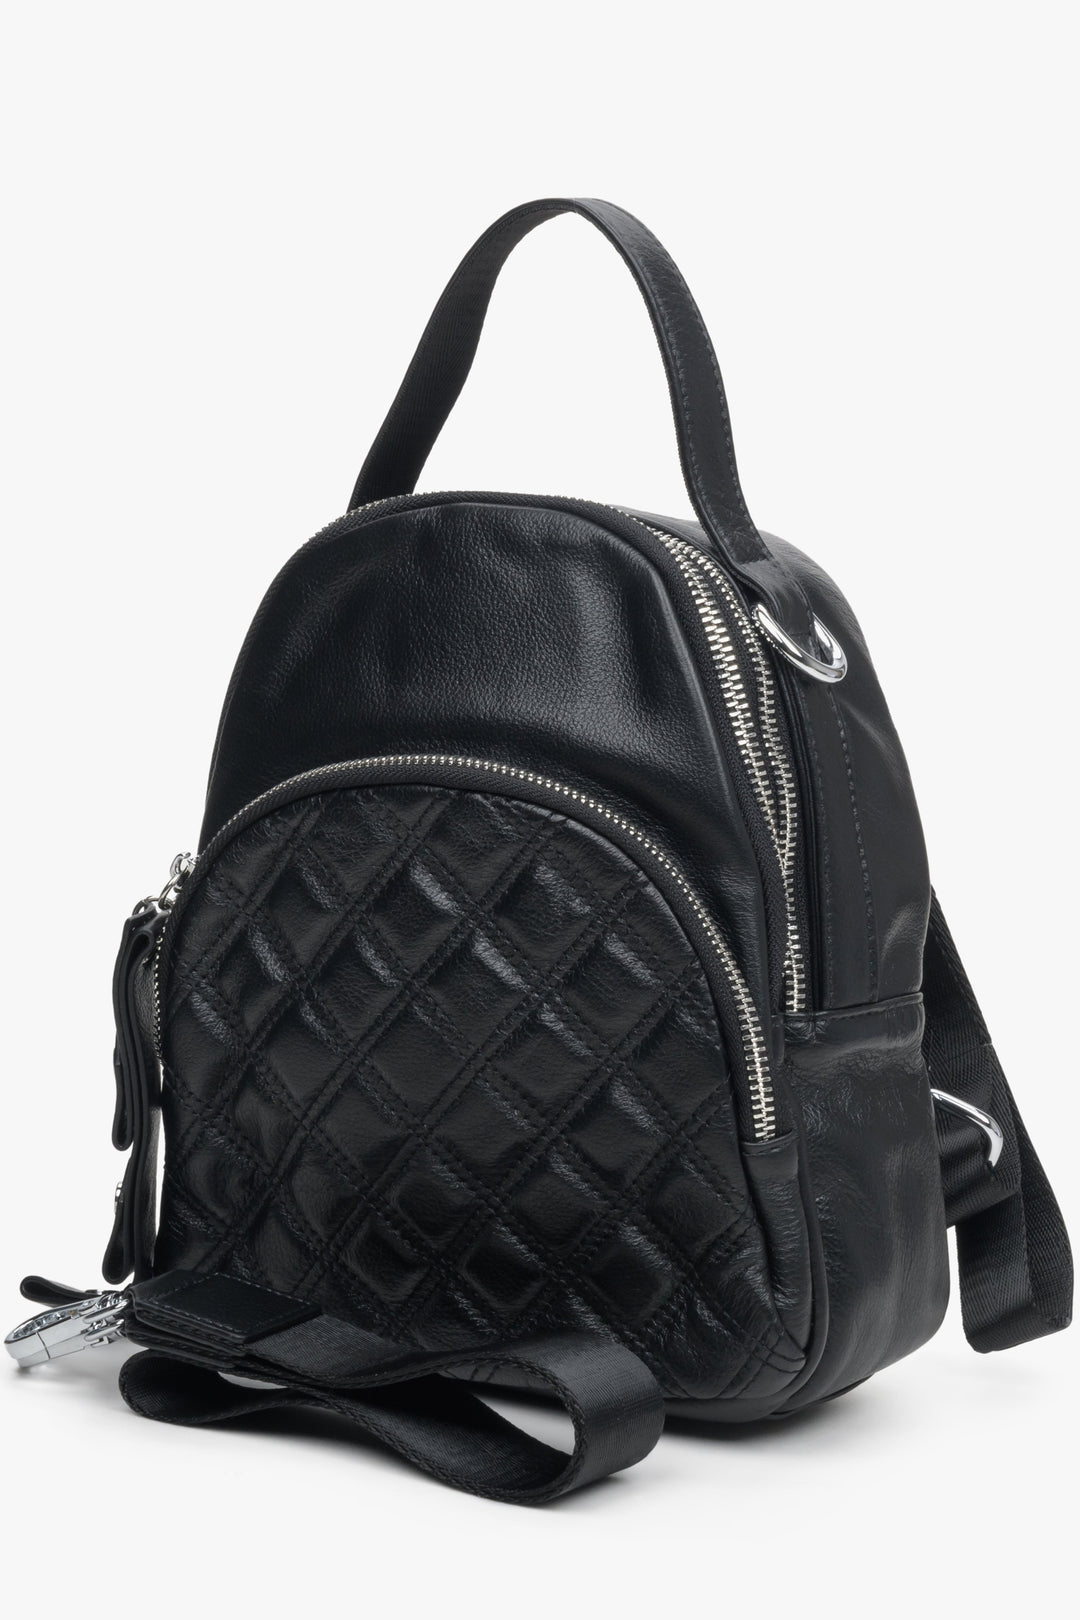 Small, urban women's black backpack by Estro, perfect for fall - front view of the model.